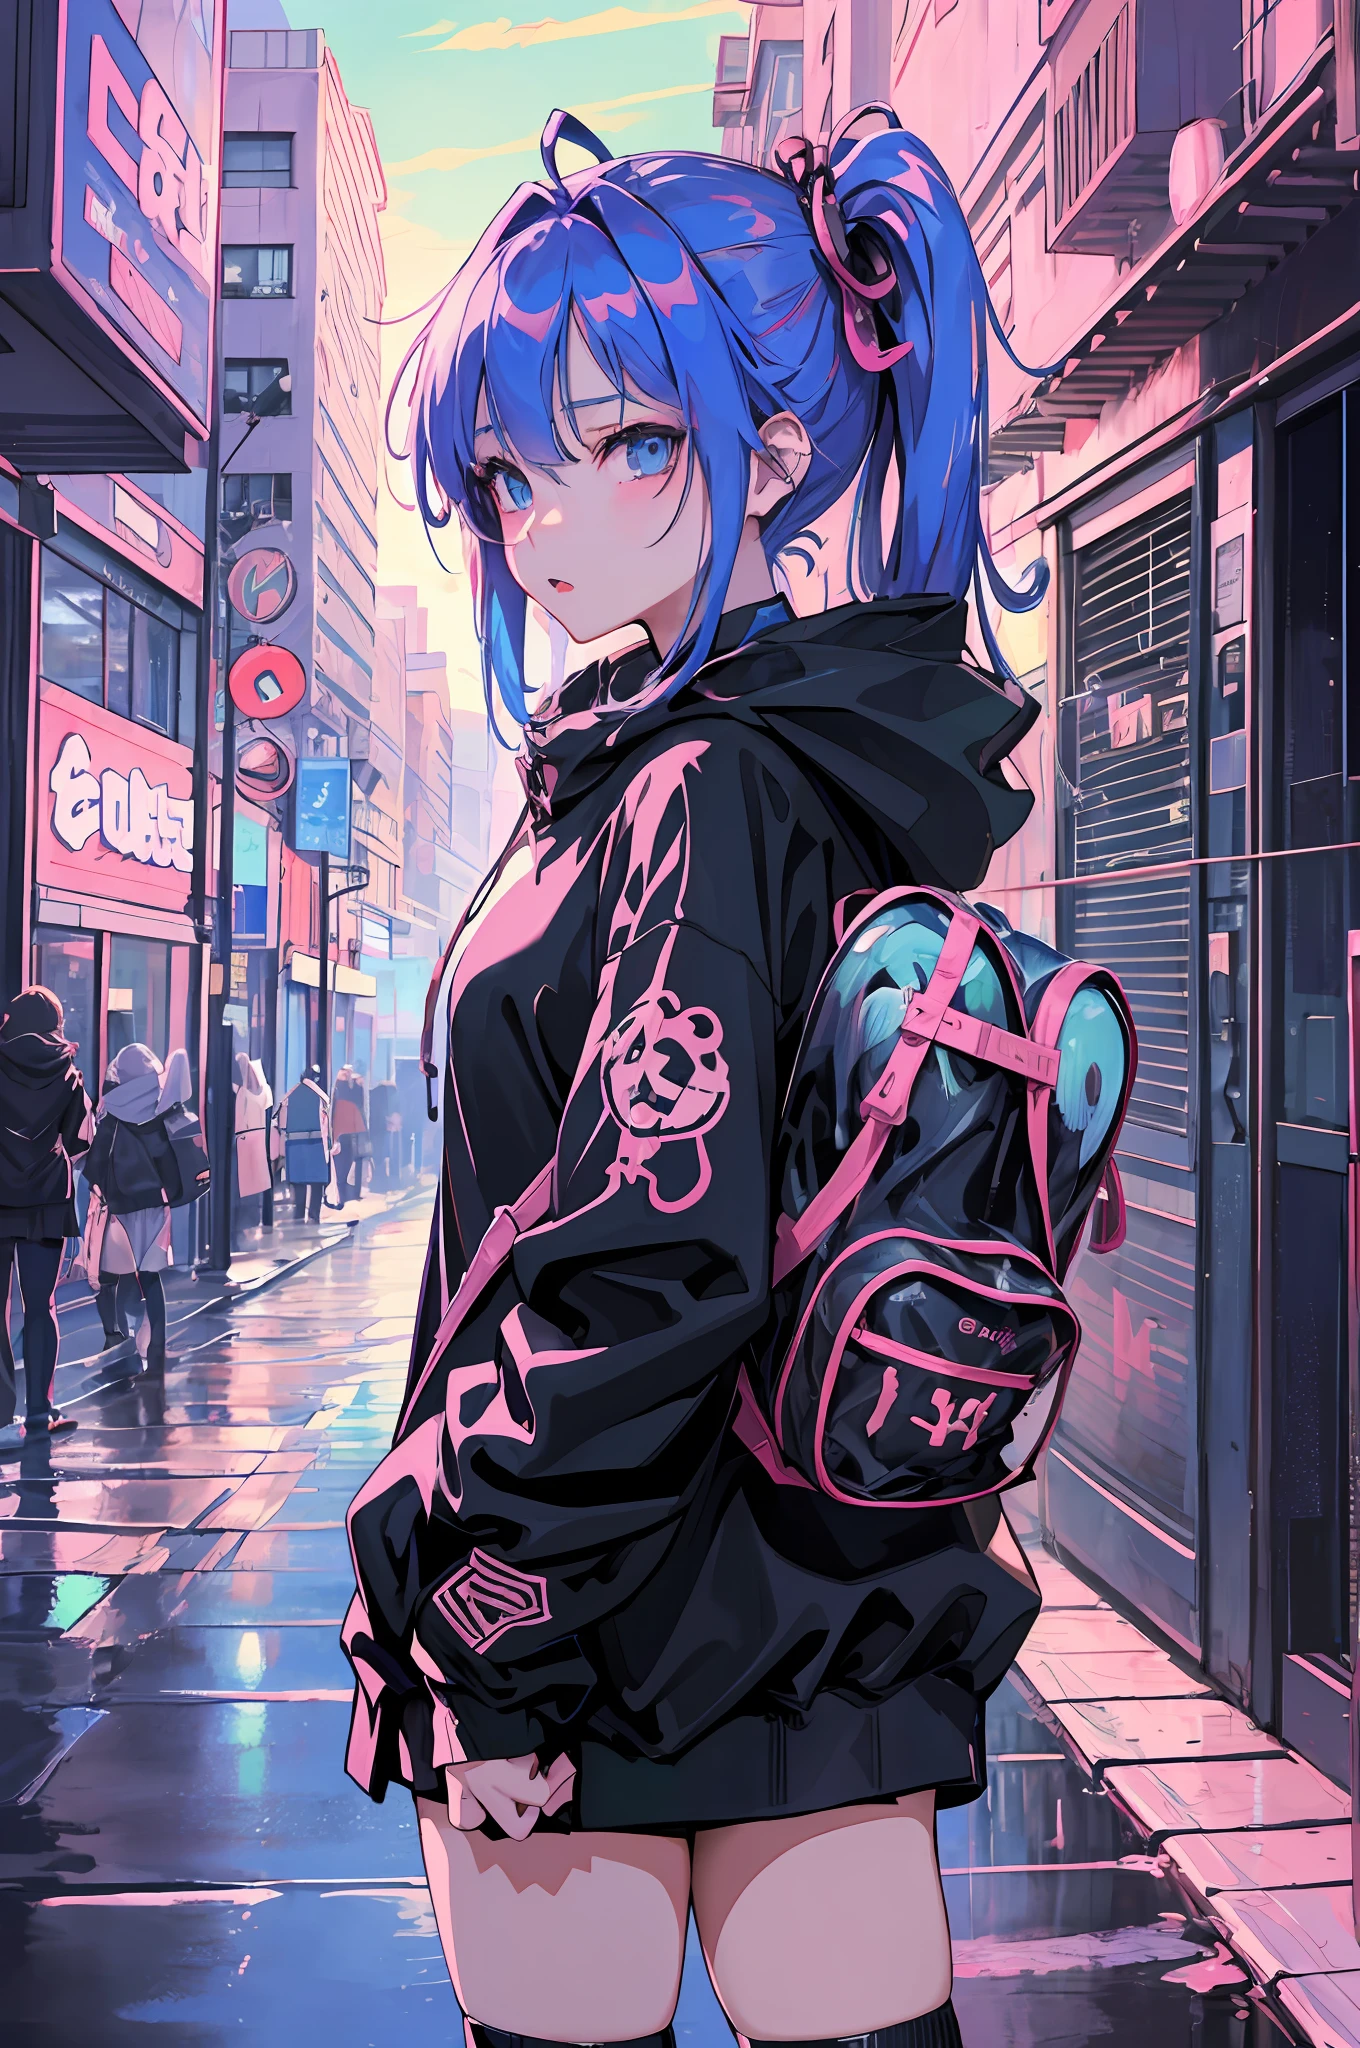 anime girl in the rain with a backpack and a backpack, anime style 4 k, cyberpunk anime girl in hoodie, 4k anime wallpaper, anime art wallpaper 8 k, anime art wallpaper 4k, anime art wallpaper 4 k, anime wallpaper 4k, anime wallpaper 4 k, anime style. 8k, badass anime 8 k, digital cyberpunk anime art